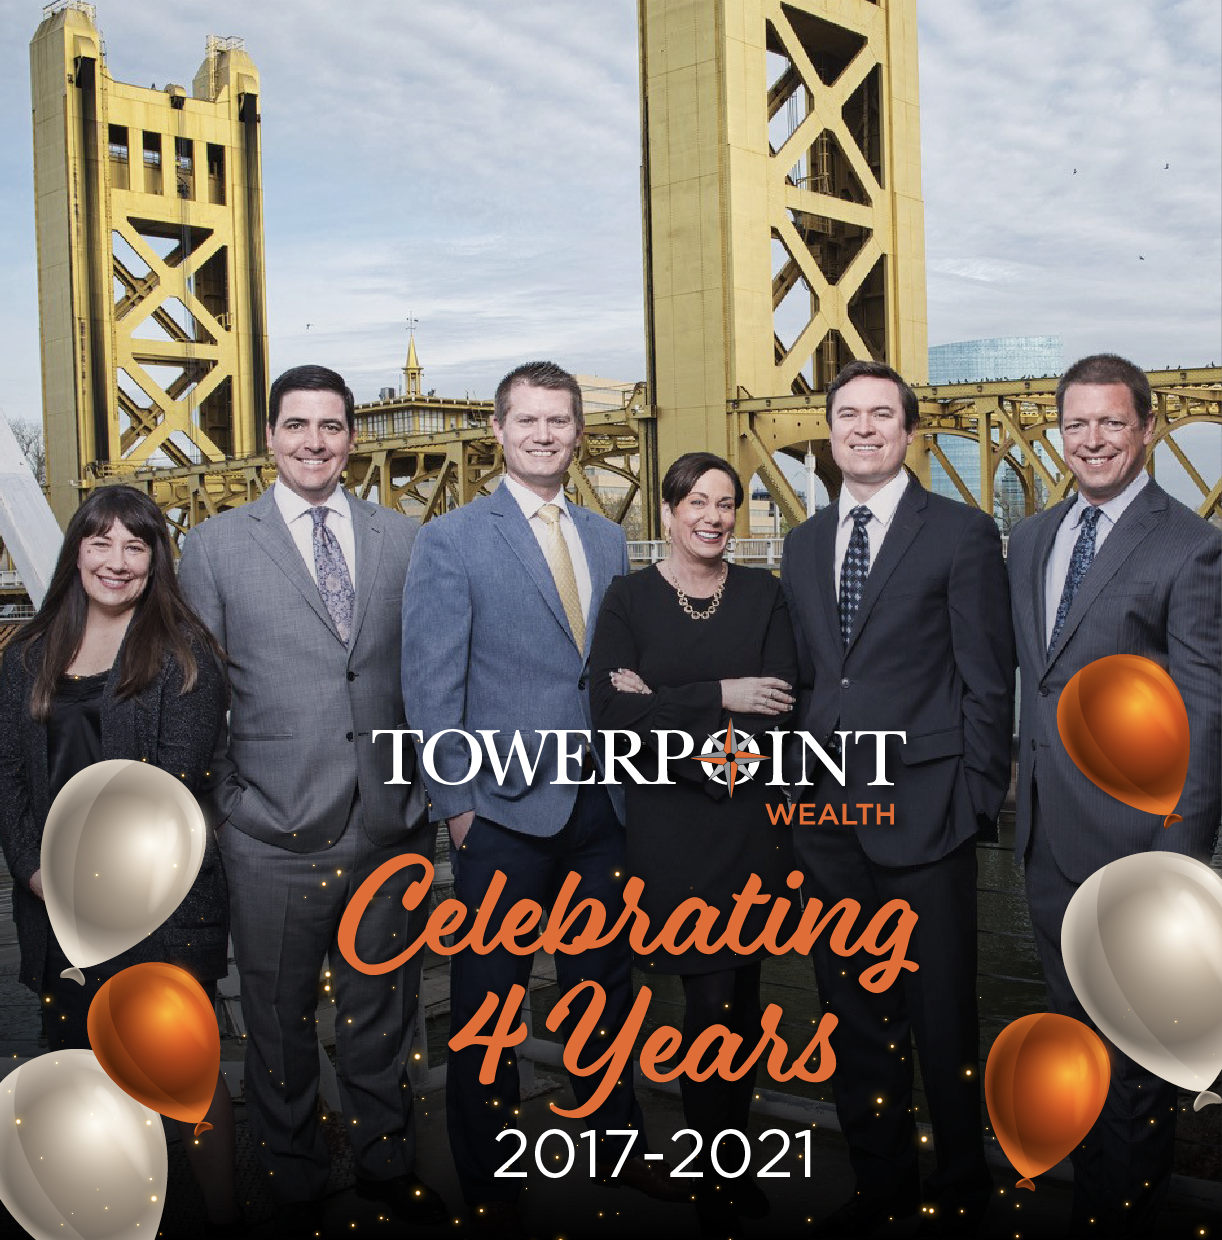 Towerpoint Wealth Celebrating 4 Years Building Wealth